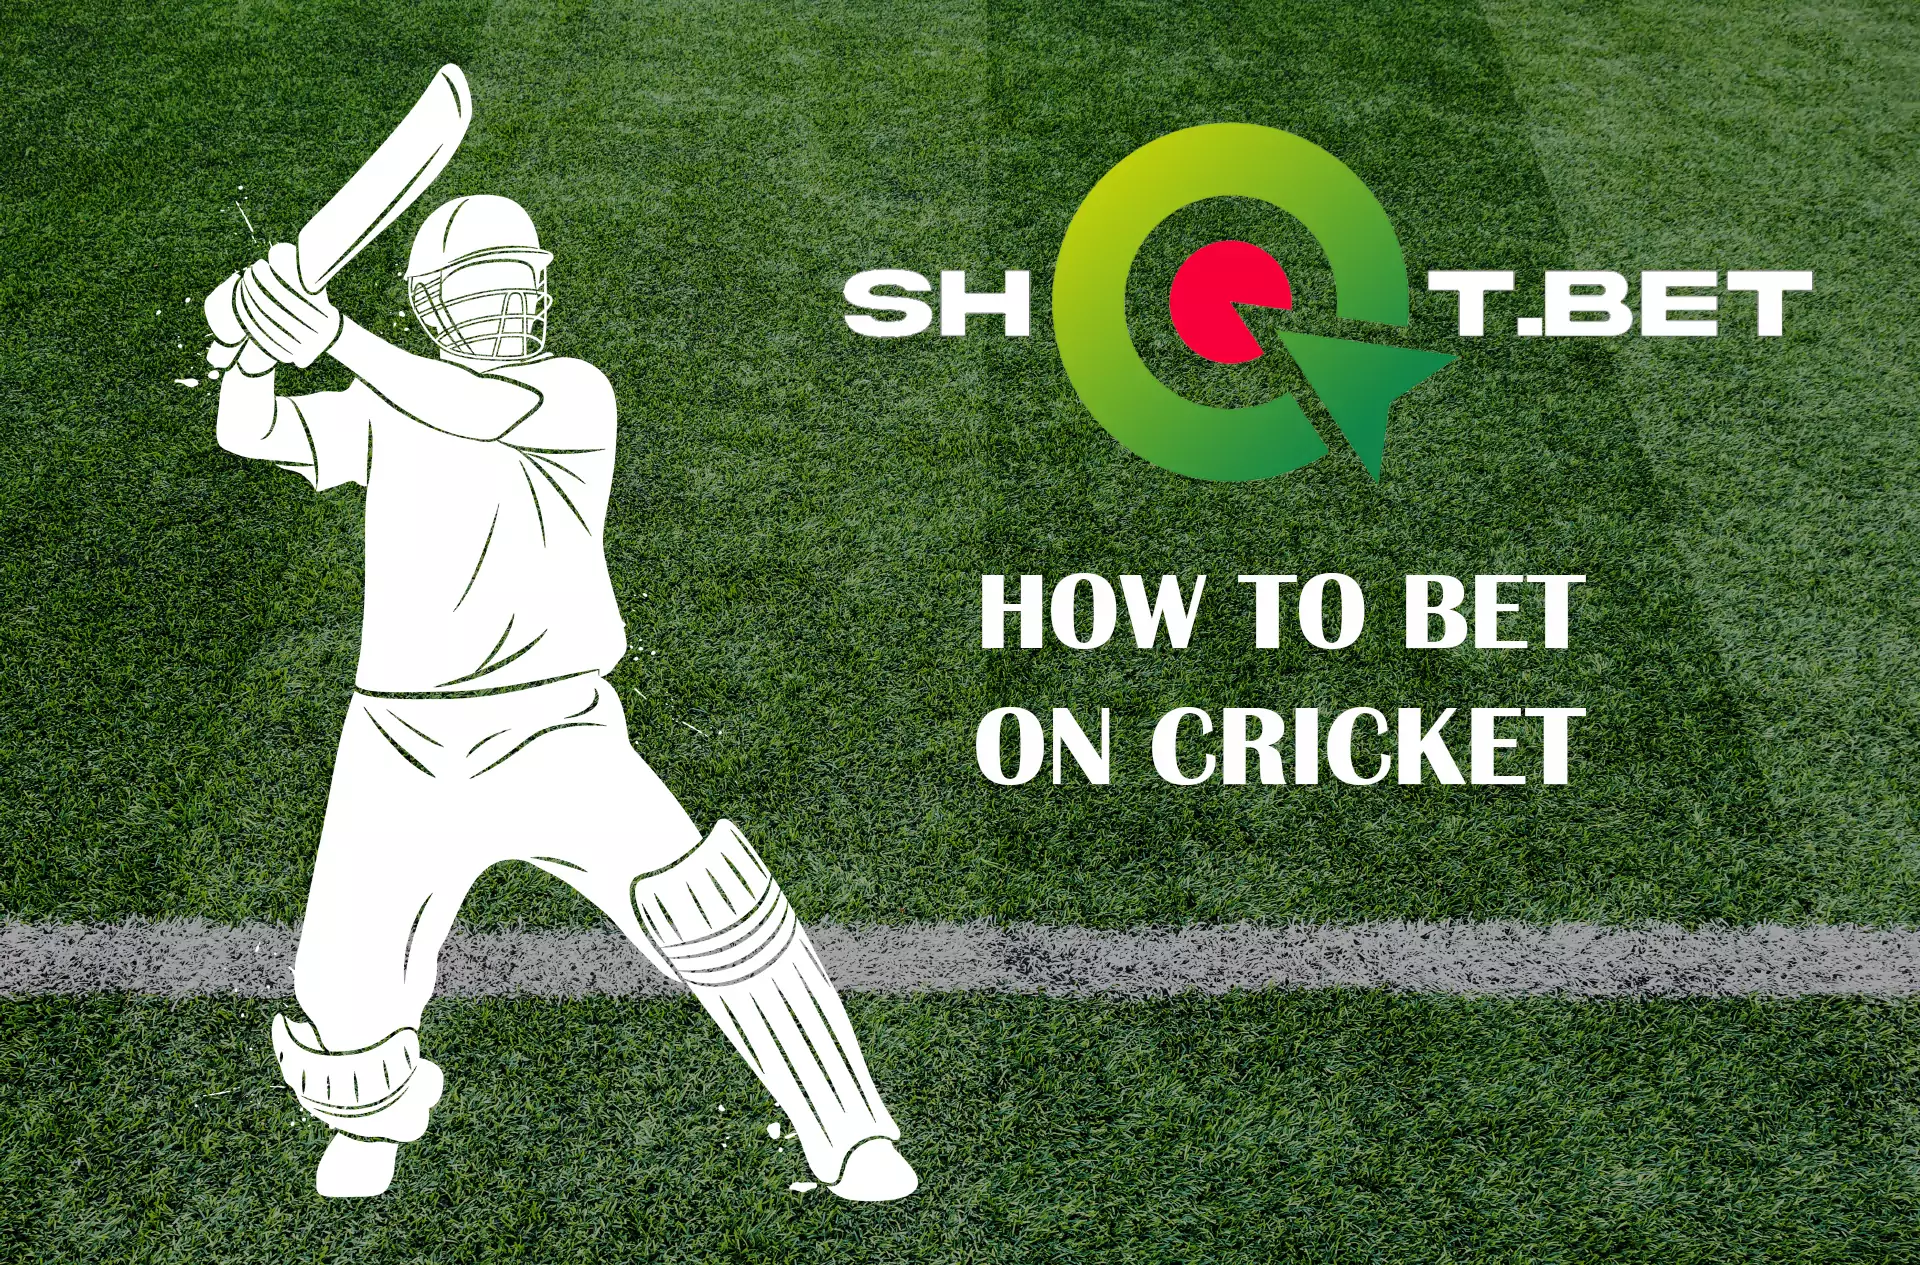 Betting on cricket is one of the most popular sections of the site among users from India.